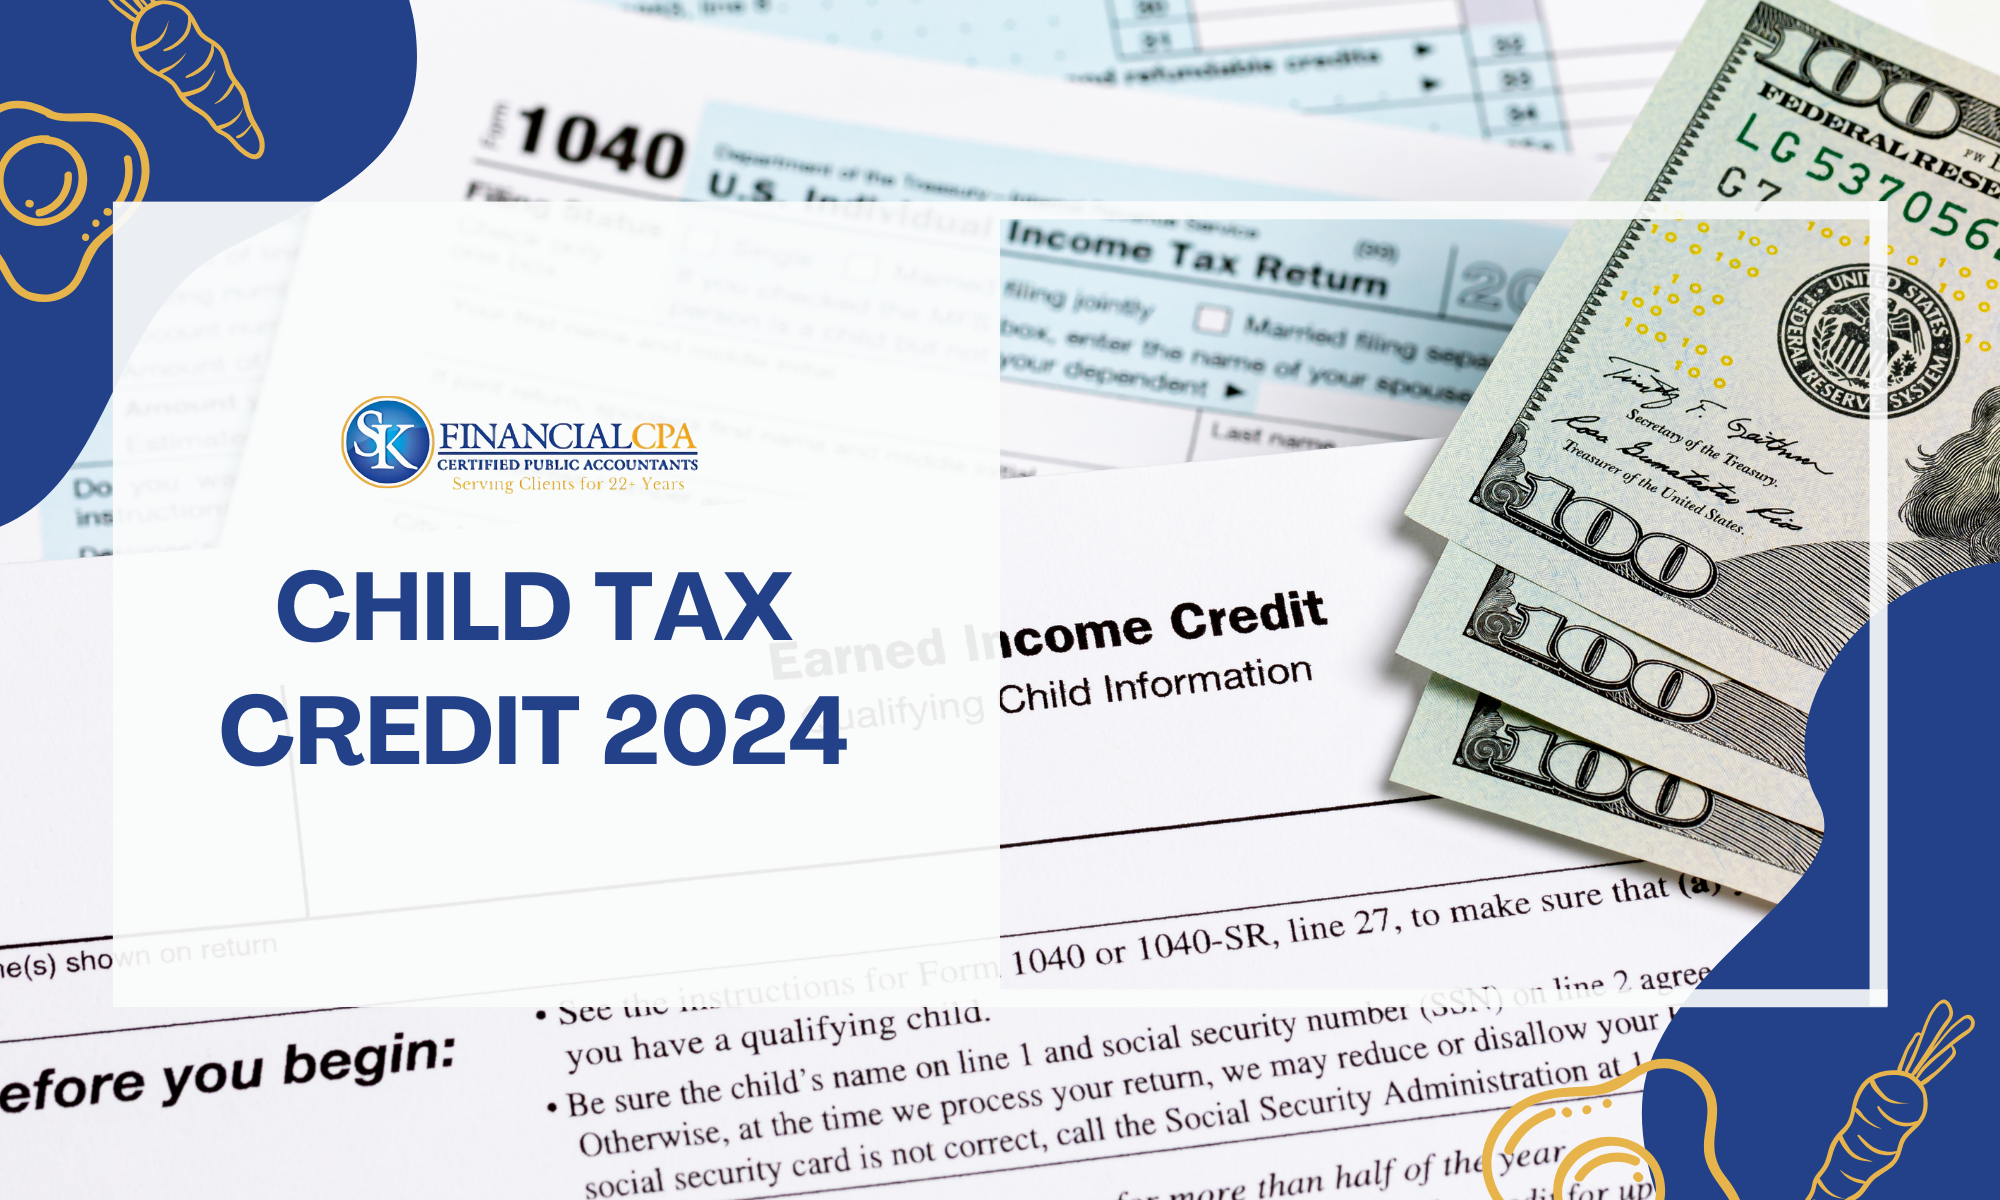 Child Tax Credit 2024: Understand Requirements and Proposed Changes